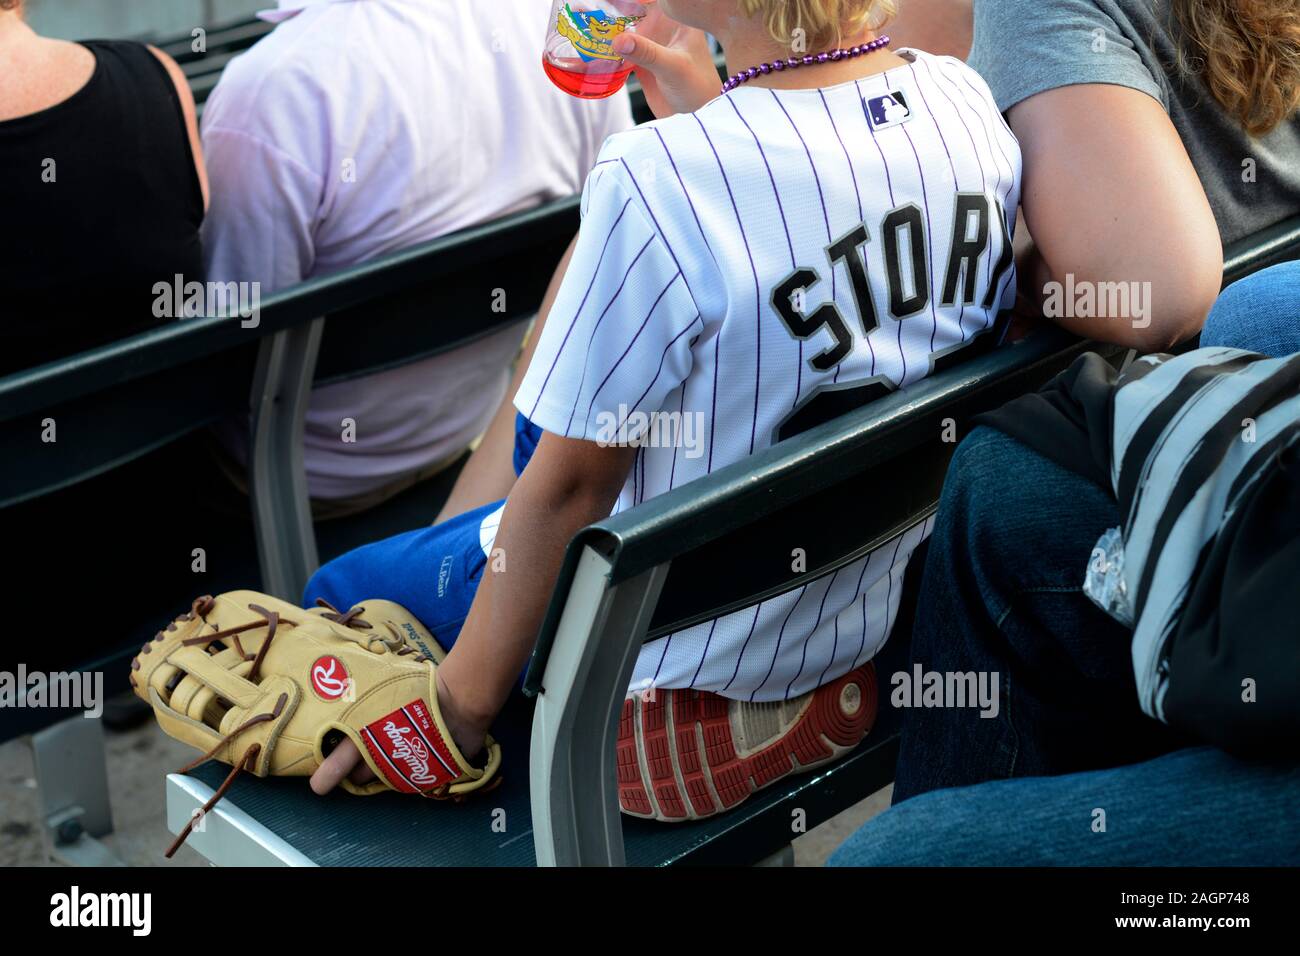 Colorado Rockies baseball fans wearing MLB jerseys showing their favorite Rockies players attend a game at Coors Field in Denver, Colorado. Stock Photo